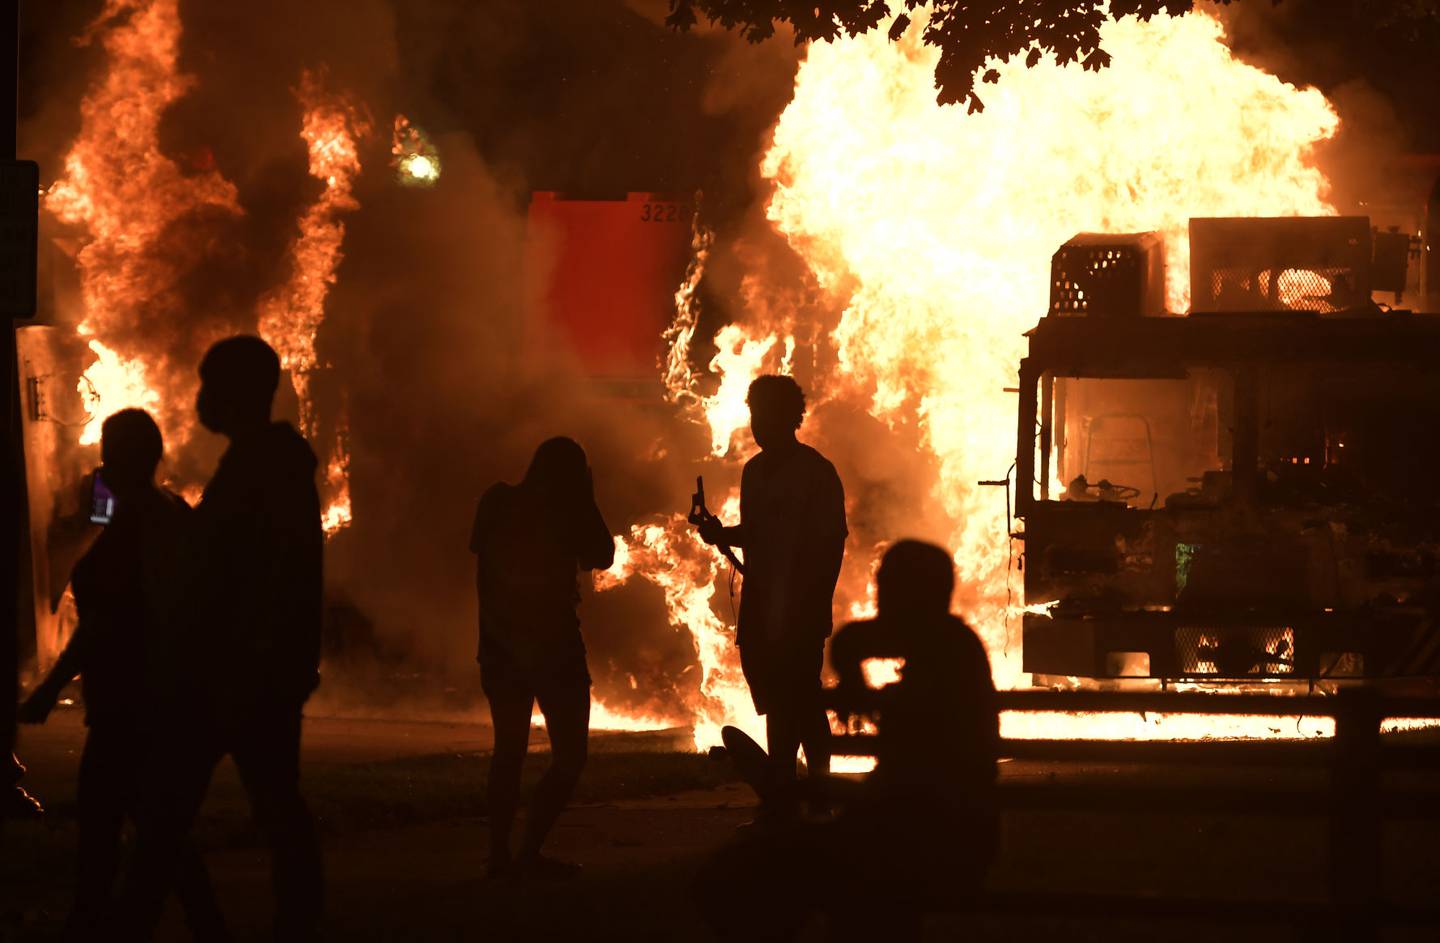 Garbage and dump trucks were set ablaze on Sunday, Aug. 23, 2020 by rioters near the Kenosha County Courthouse where they had been set up to prevent damage to the building.